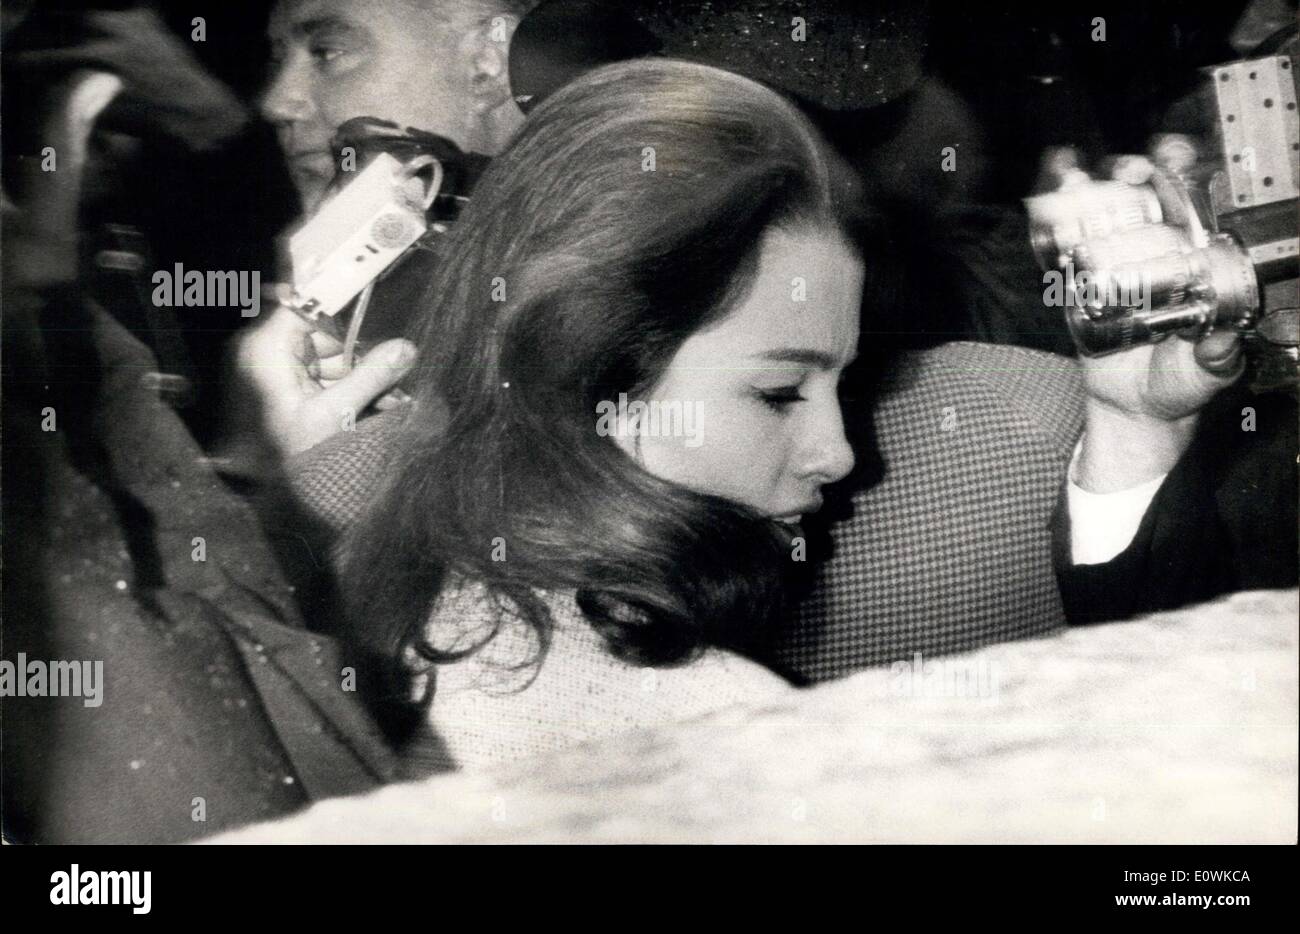 Jun. 28, 1963 - Trail of Stephen Ward Begins: The Trial of Society Osteopath Dr. Stephen Ward opened at marylebomne London Today. The first Day has been taken up with the Cross Examination of the two ohf witnesses for the prosecution Christine Keeler, and Mandy Rice-Davies Picture Shows: Christine Keeler leaves after today's. Stock Photo